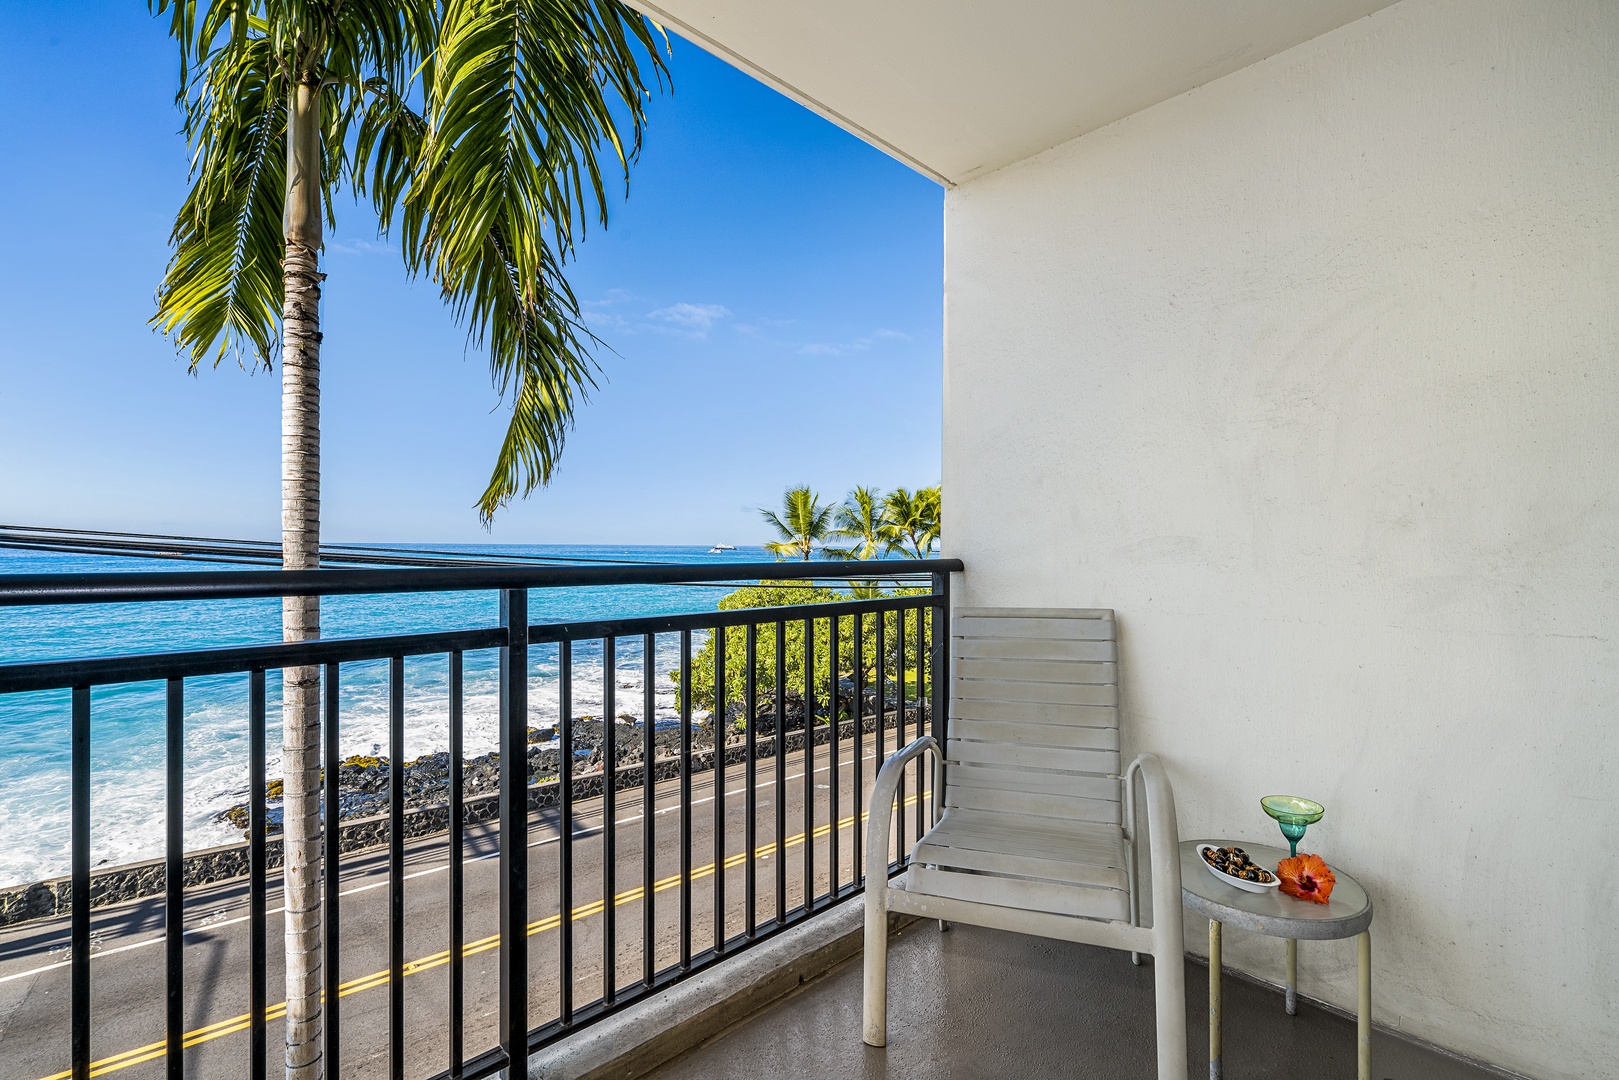 Kailua Kona Vacation Rentals, Kona Alii 201 - Private seating on the lanai to watch the waves roll in!